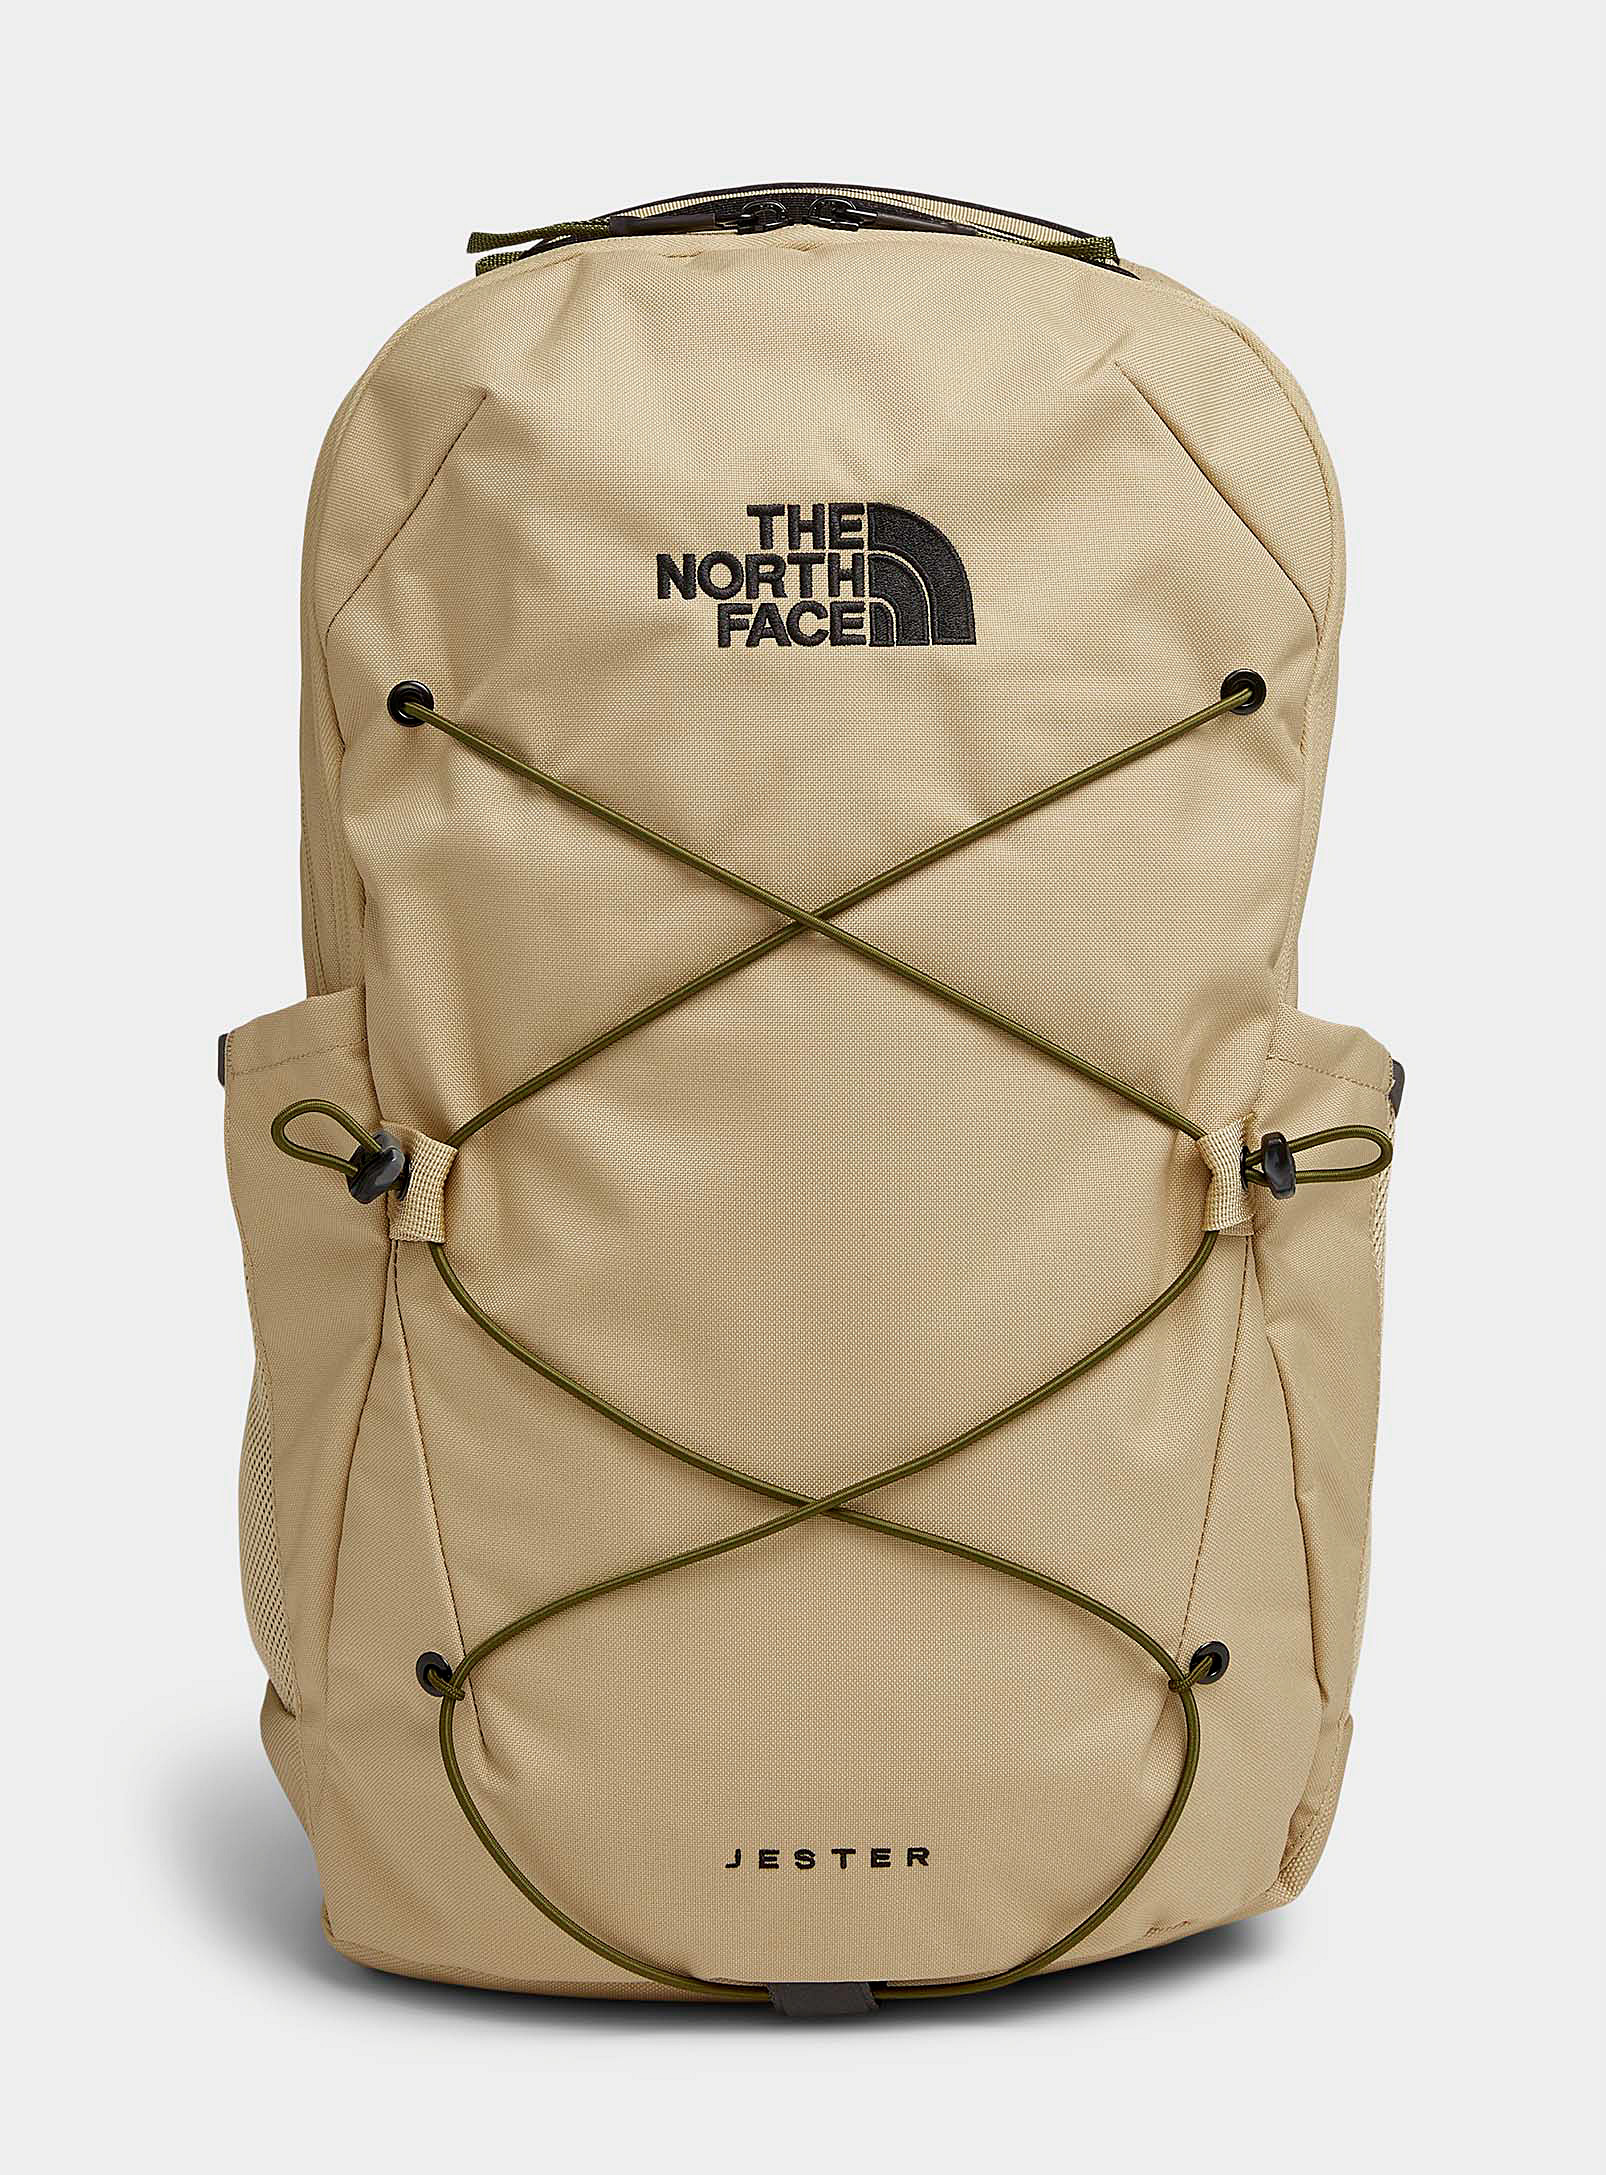 The North Face Jester Backpack In Neutral